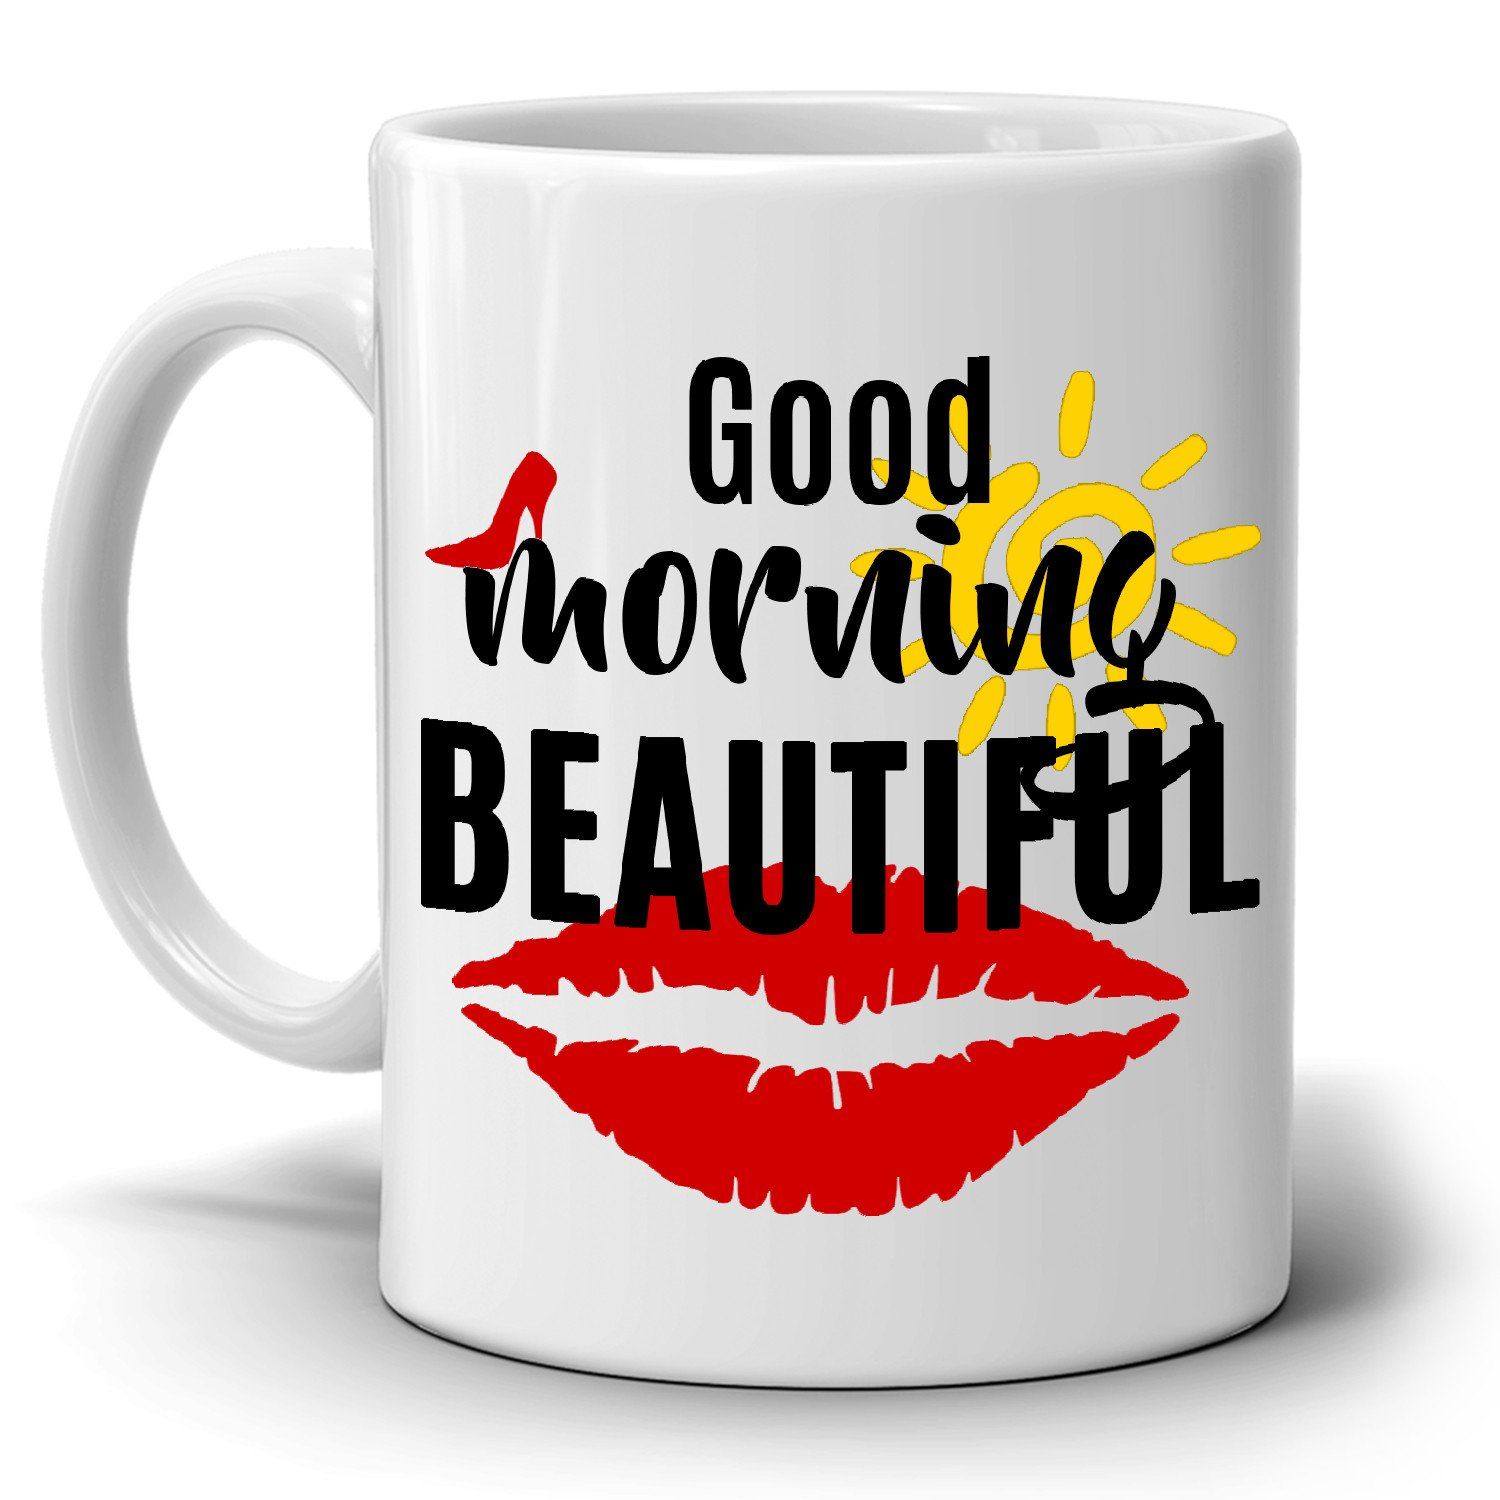 A mug for her with a good morning wish